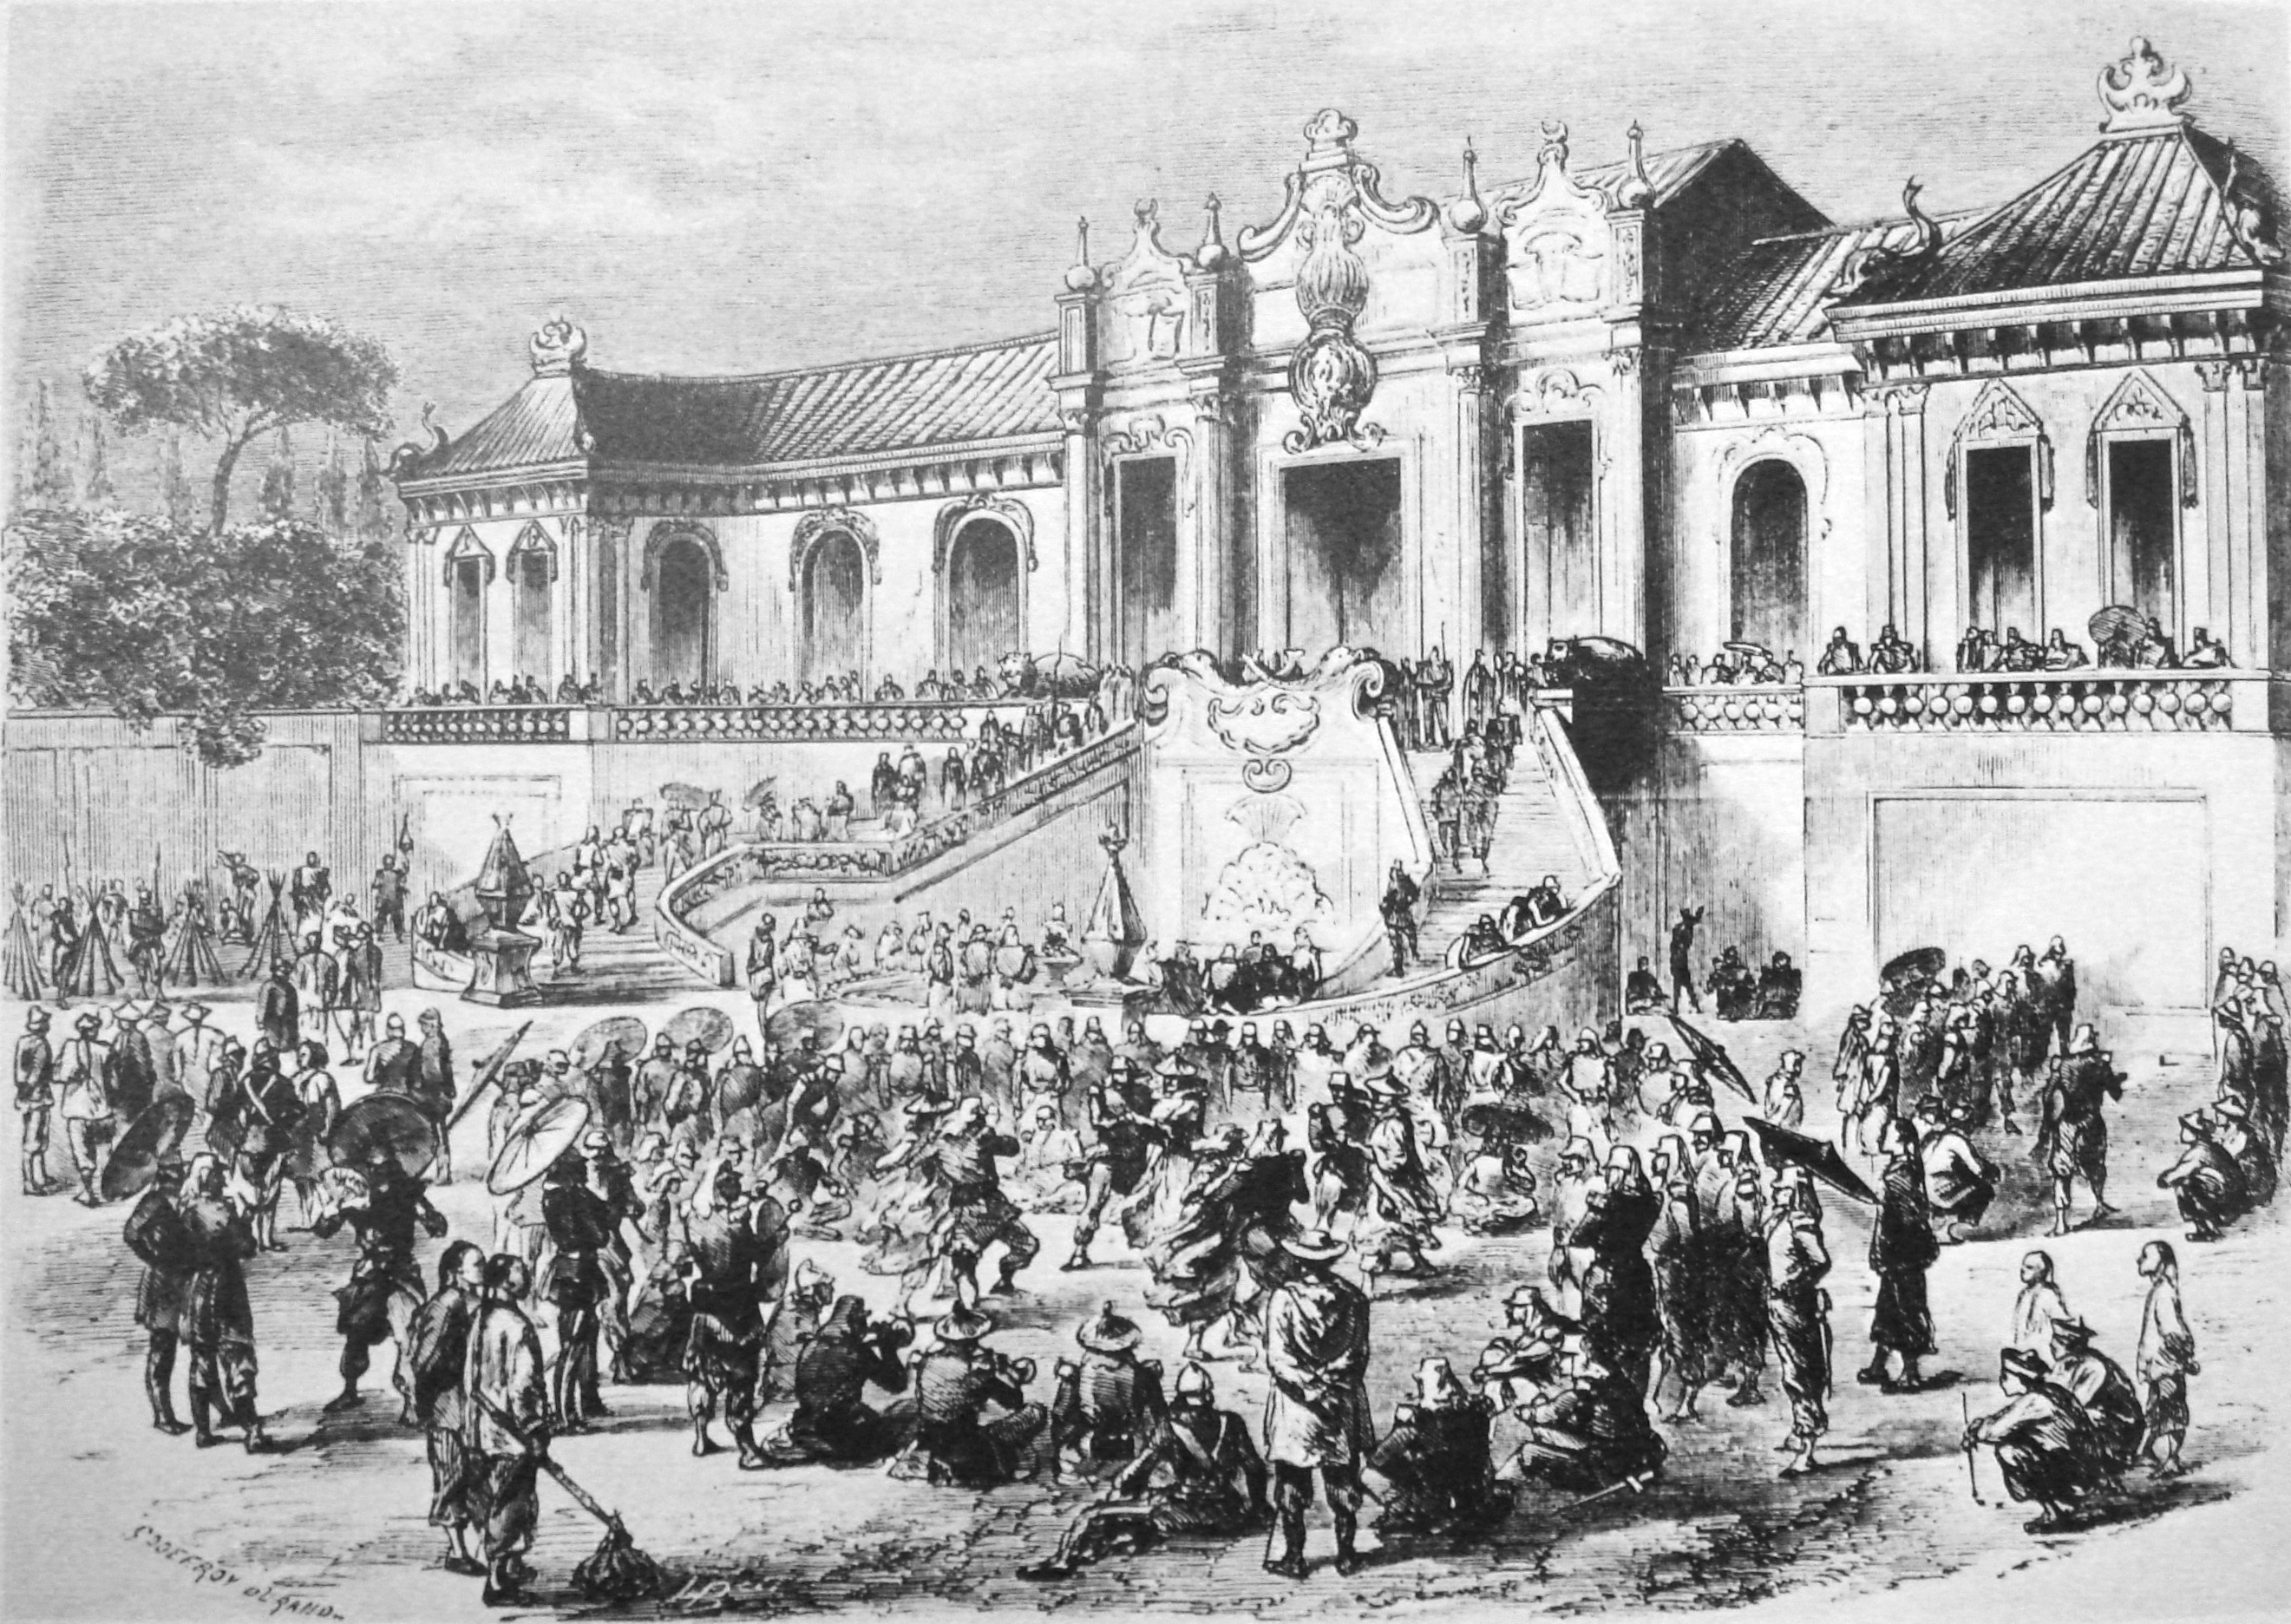 Looting_of_the_Yuan_Ming_Yuan_by_Anglo_French_forces_in_1860.jpg